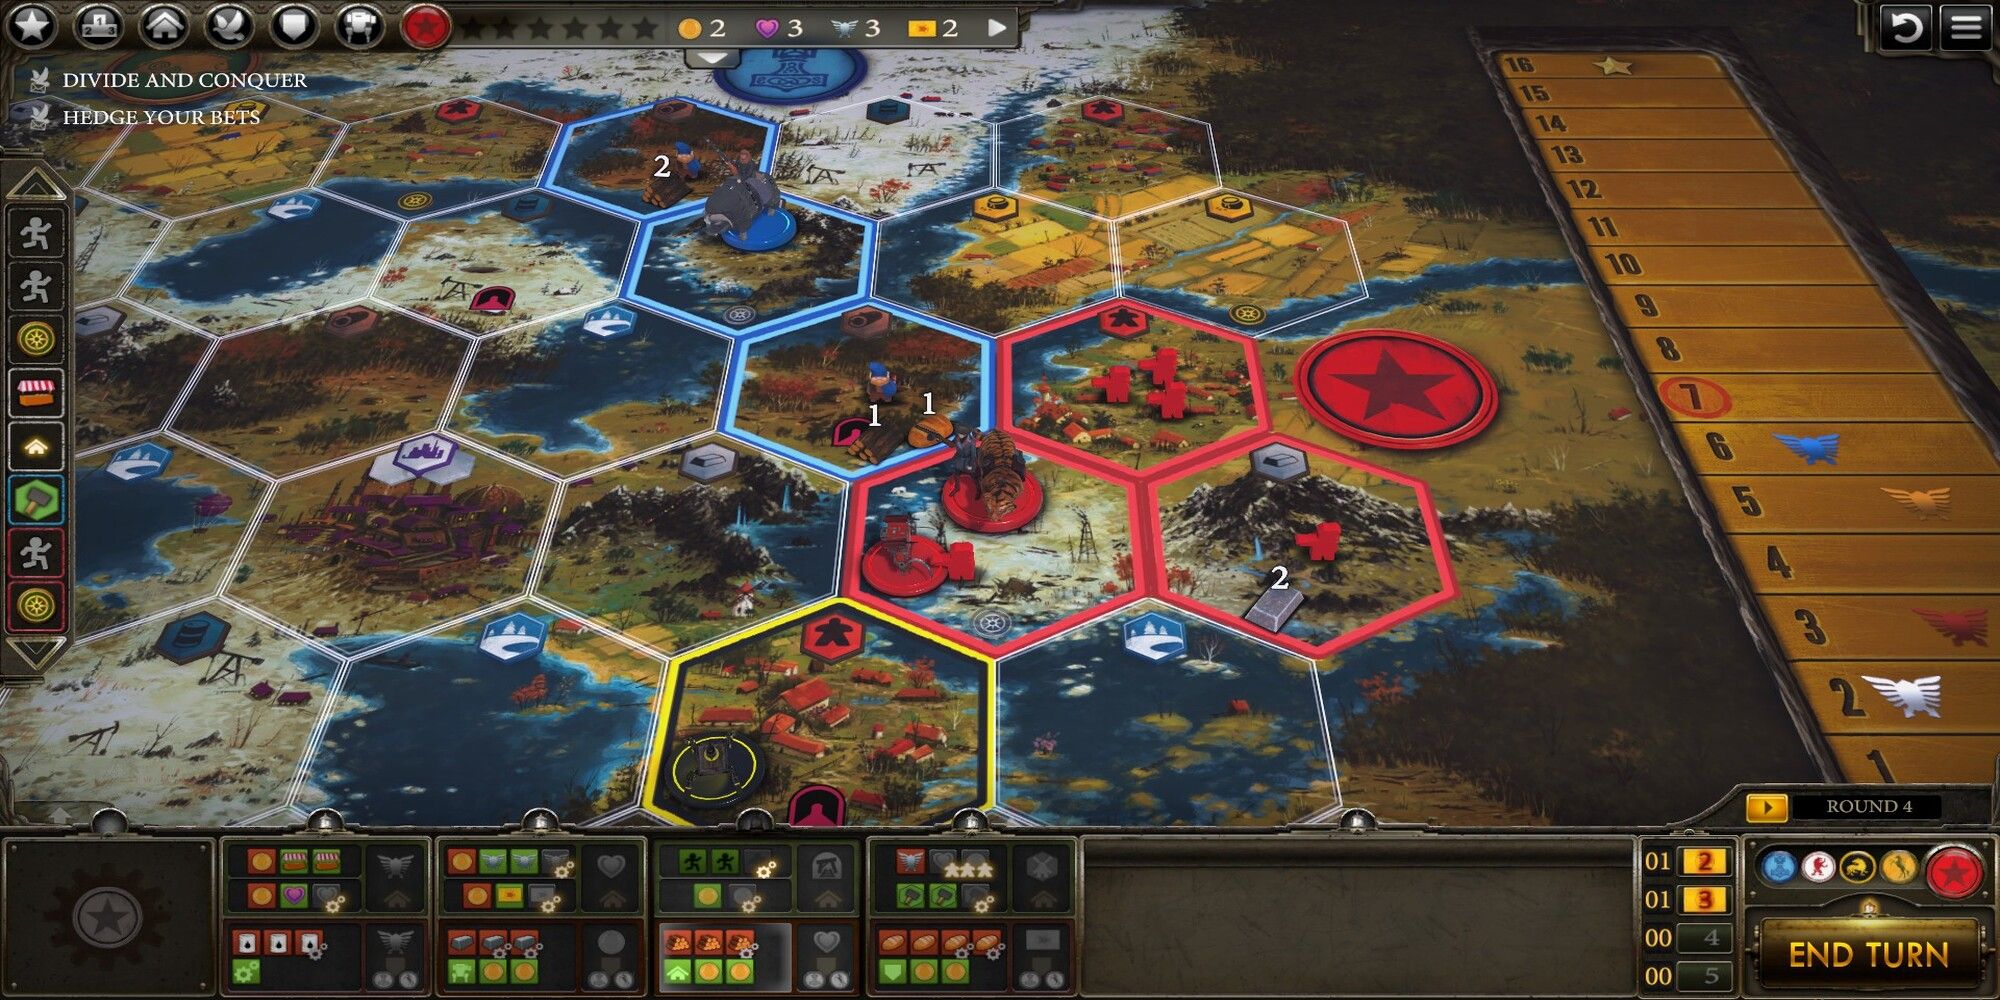 An in-game screenshot from Scythe Digital Edition showing the tiles and the map screen where you can select different options